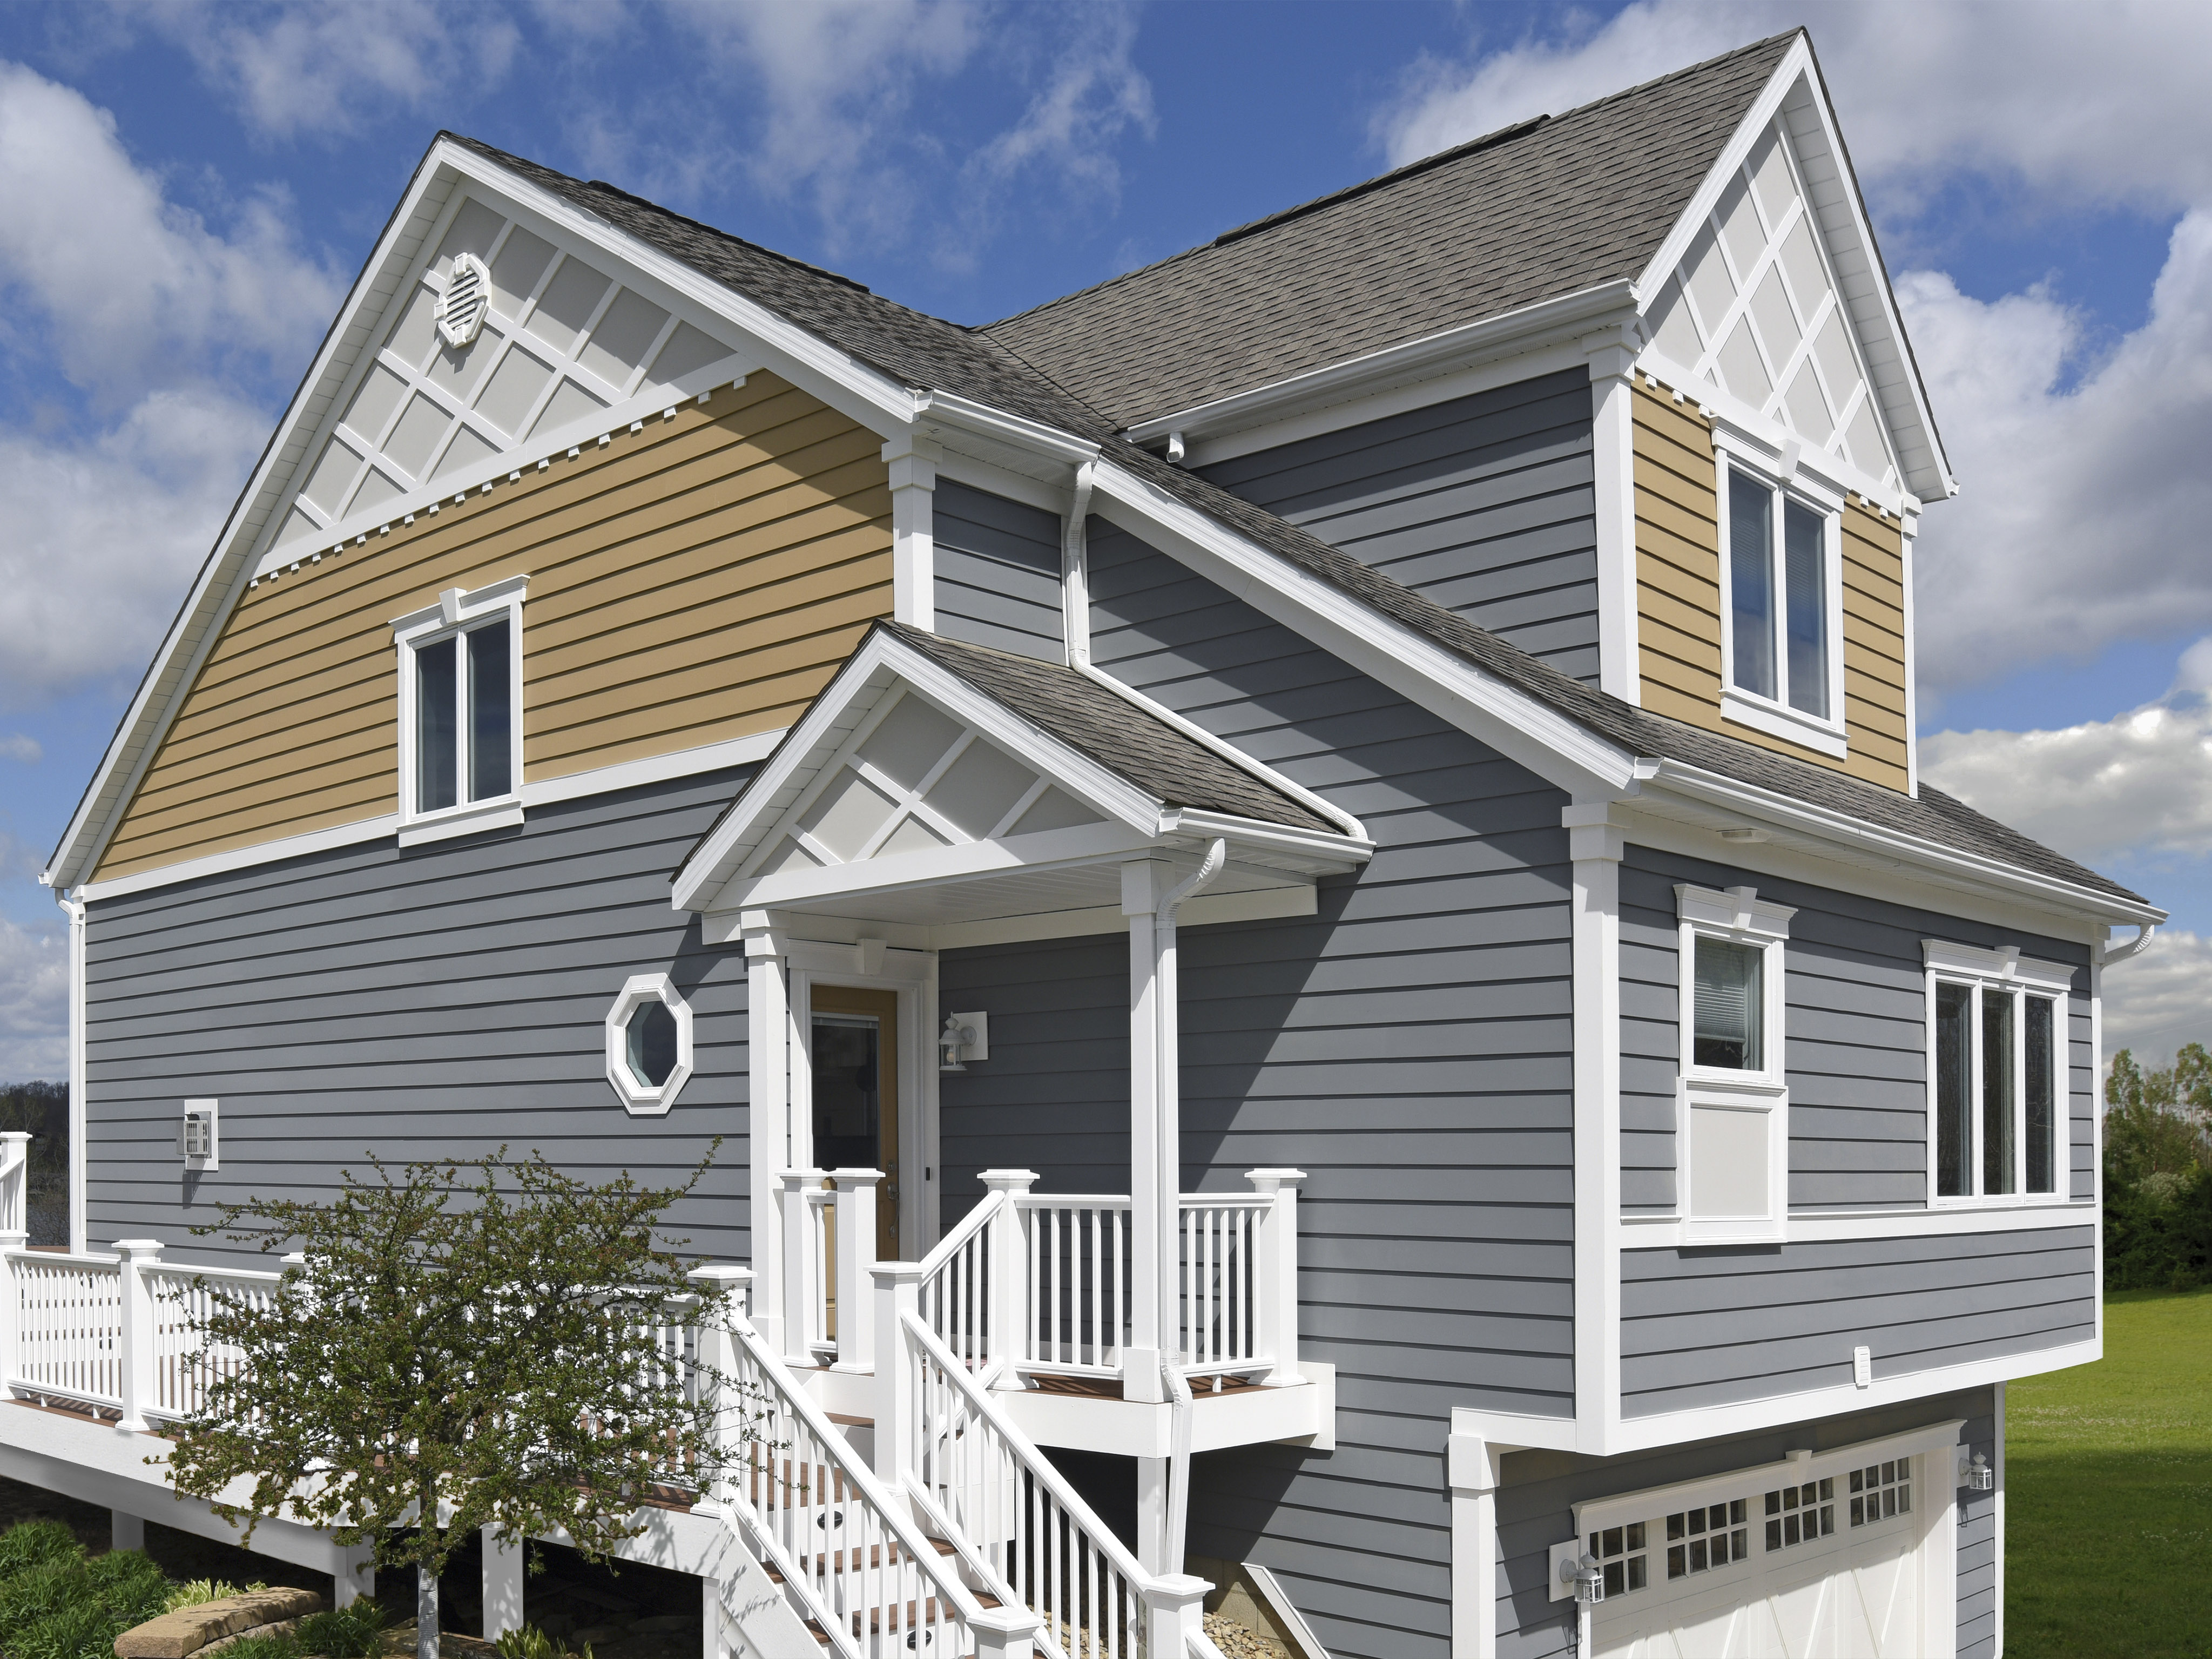 AZEK Quick-Corner can be installed with virtually any type of siding.